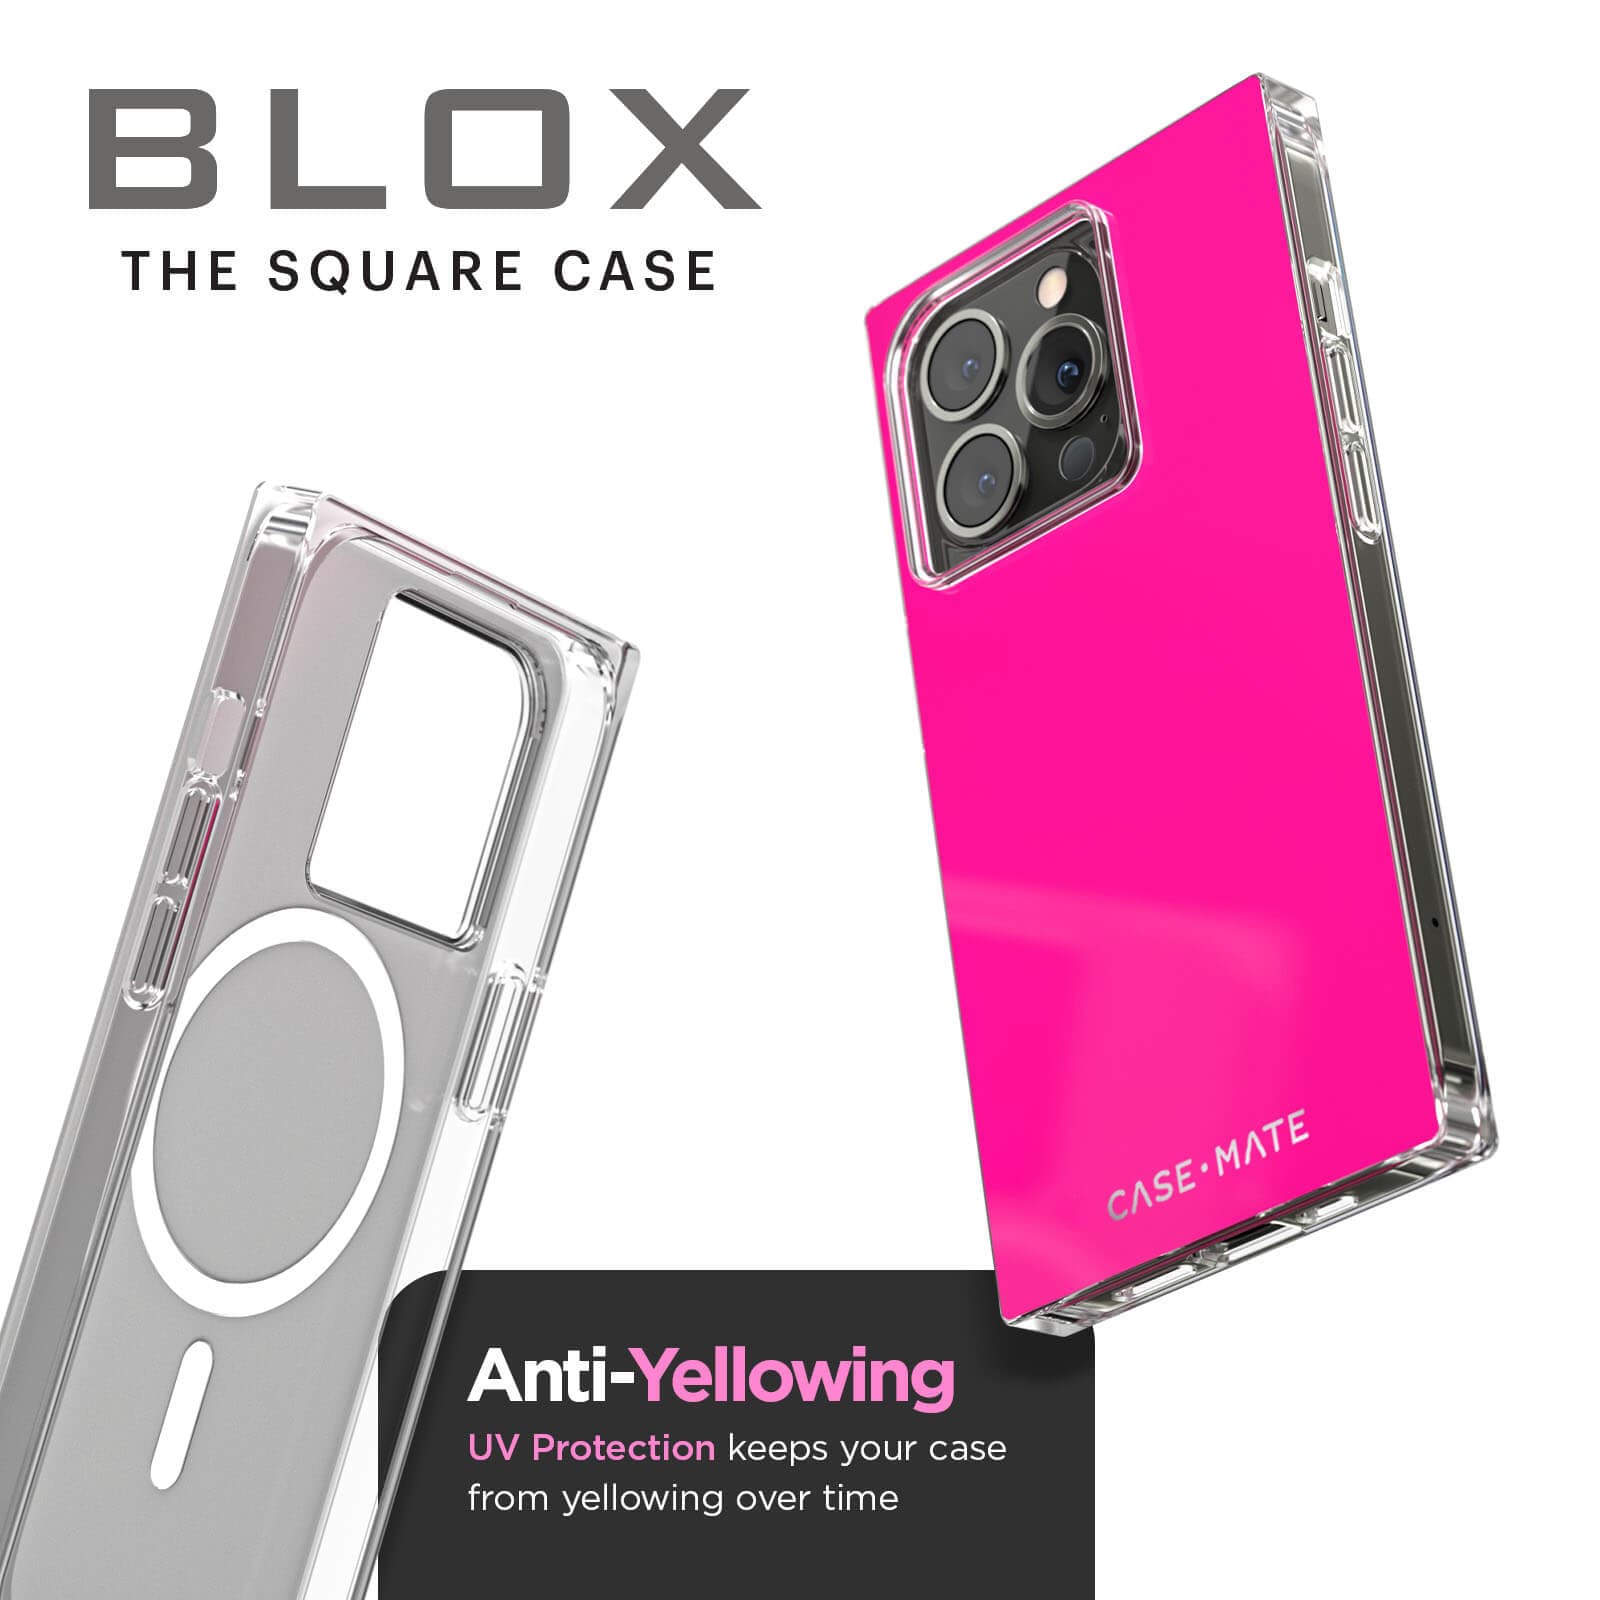 BLOX The square case. Anti-yellowing UV protection keeps your case from yellowing over time. color::Hot Pink